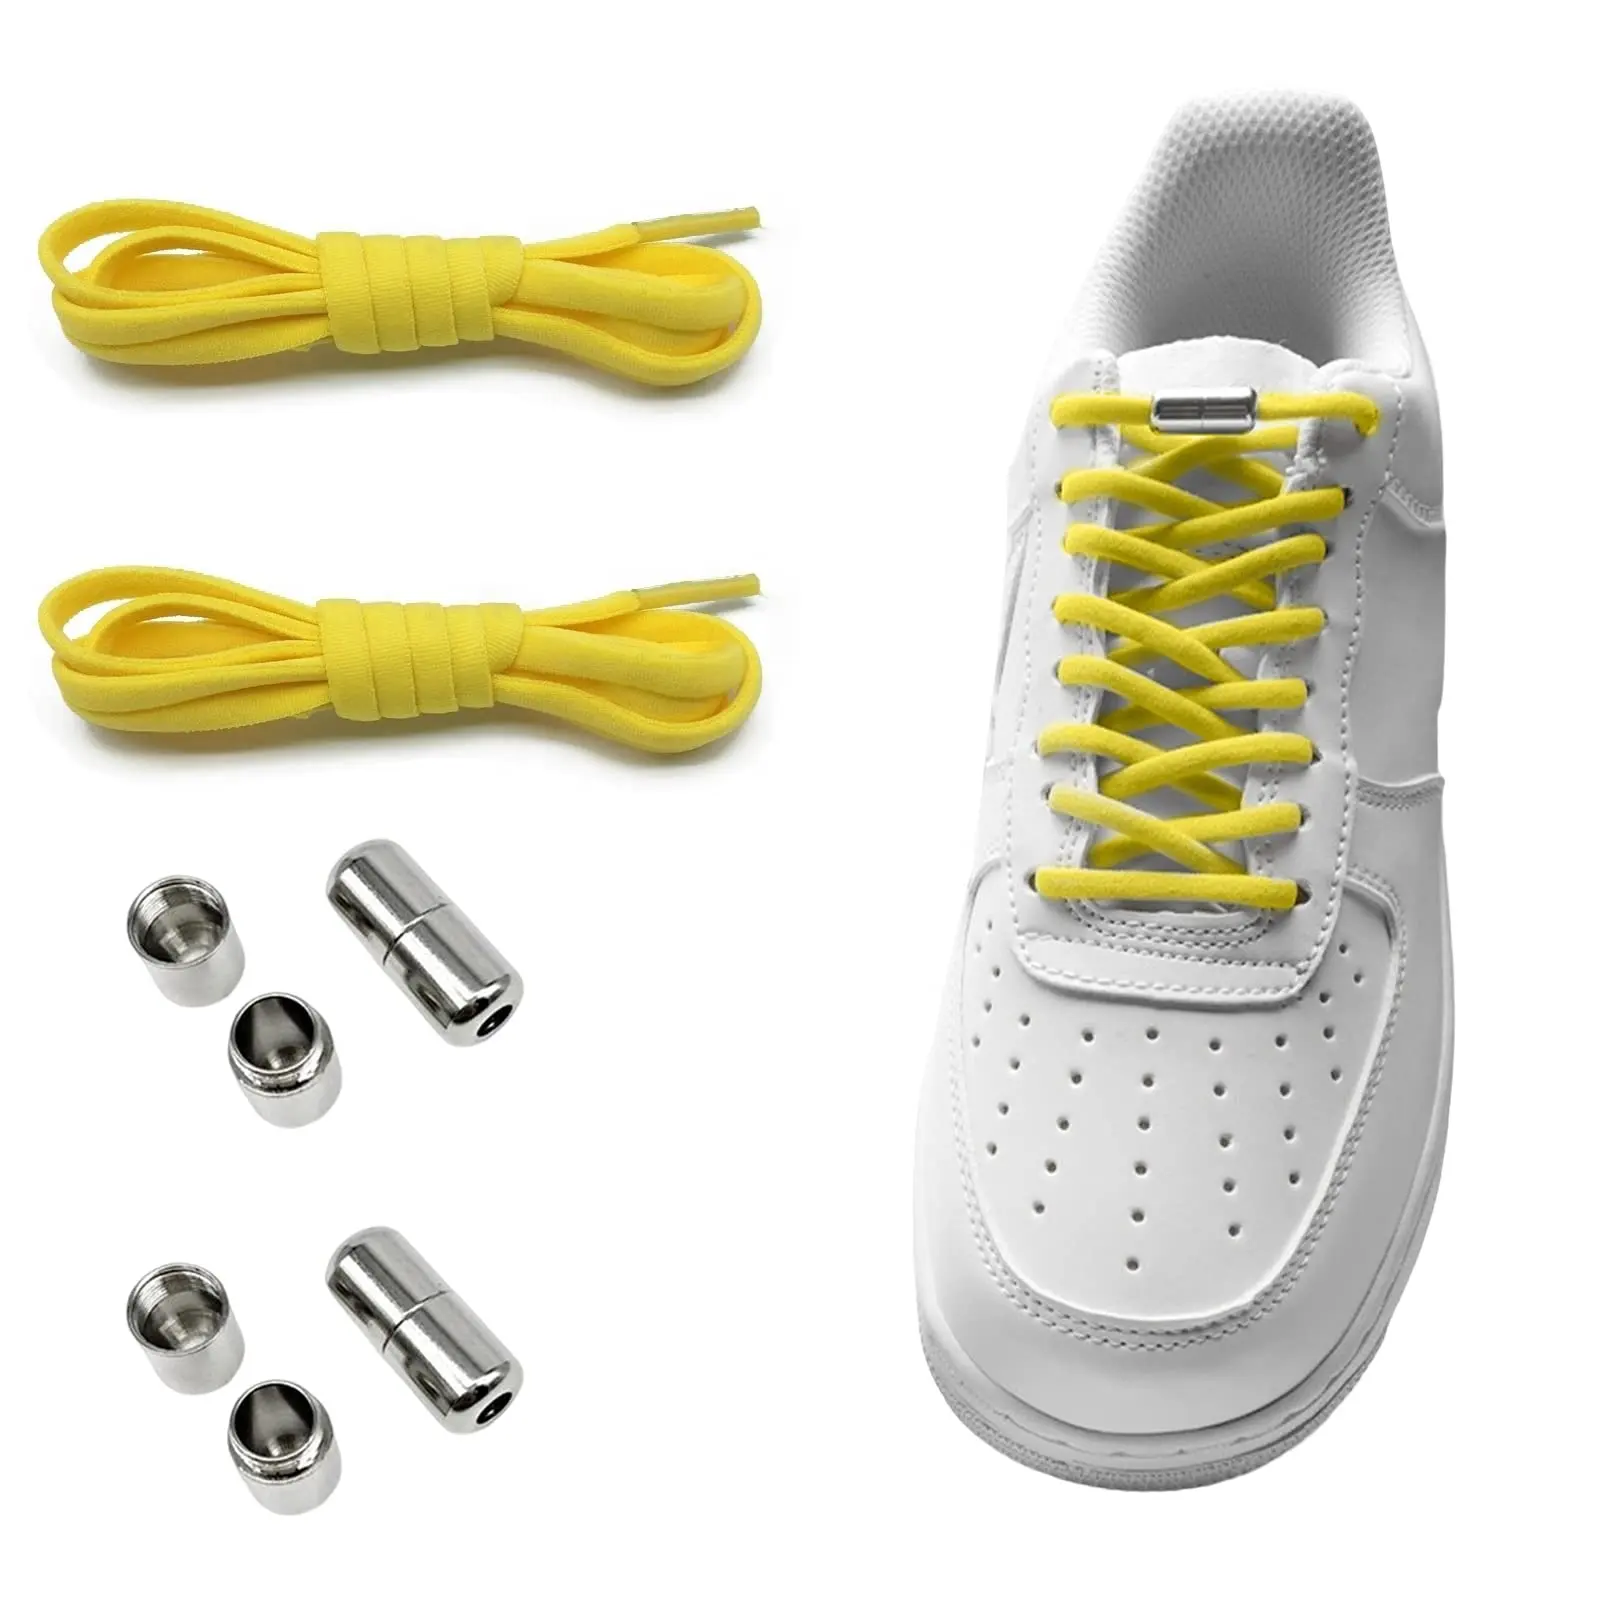 High Quality No Tie Shoelaces Oval Elastic Shoe Laces For Kids and Adult Sneakers Stretch Shoelace Quick Metal Capsule Lazy Lace